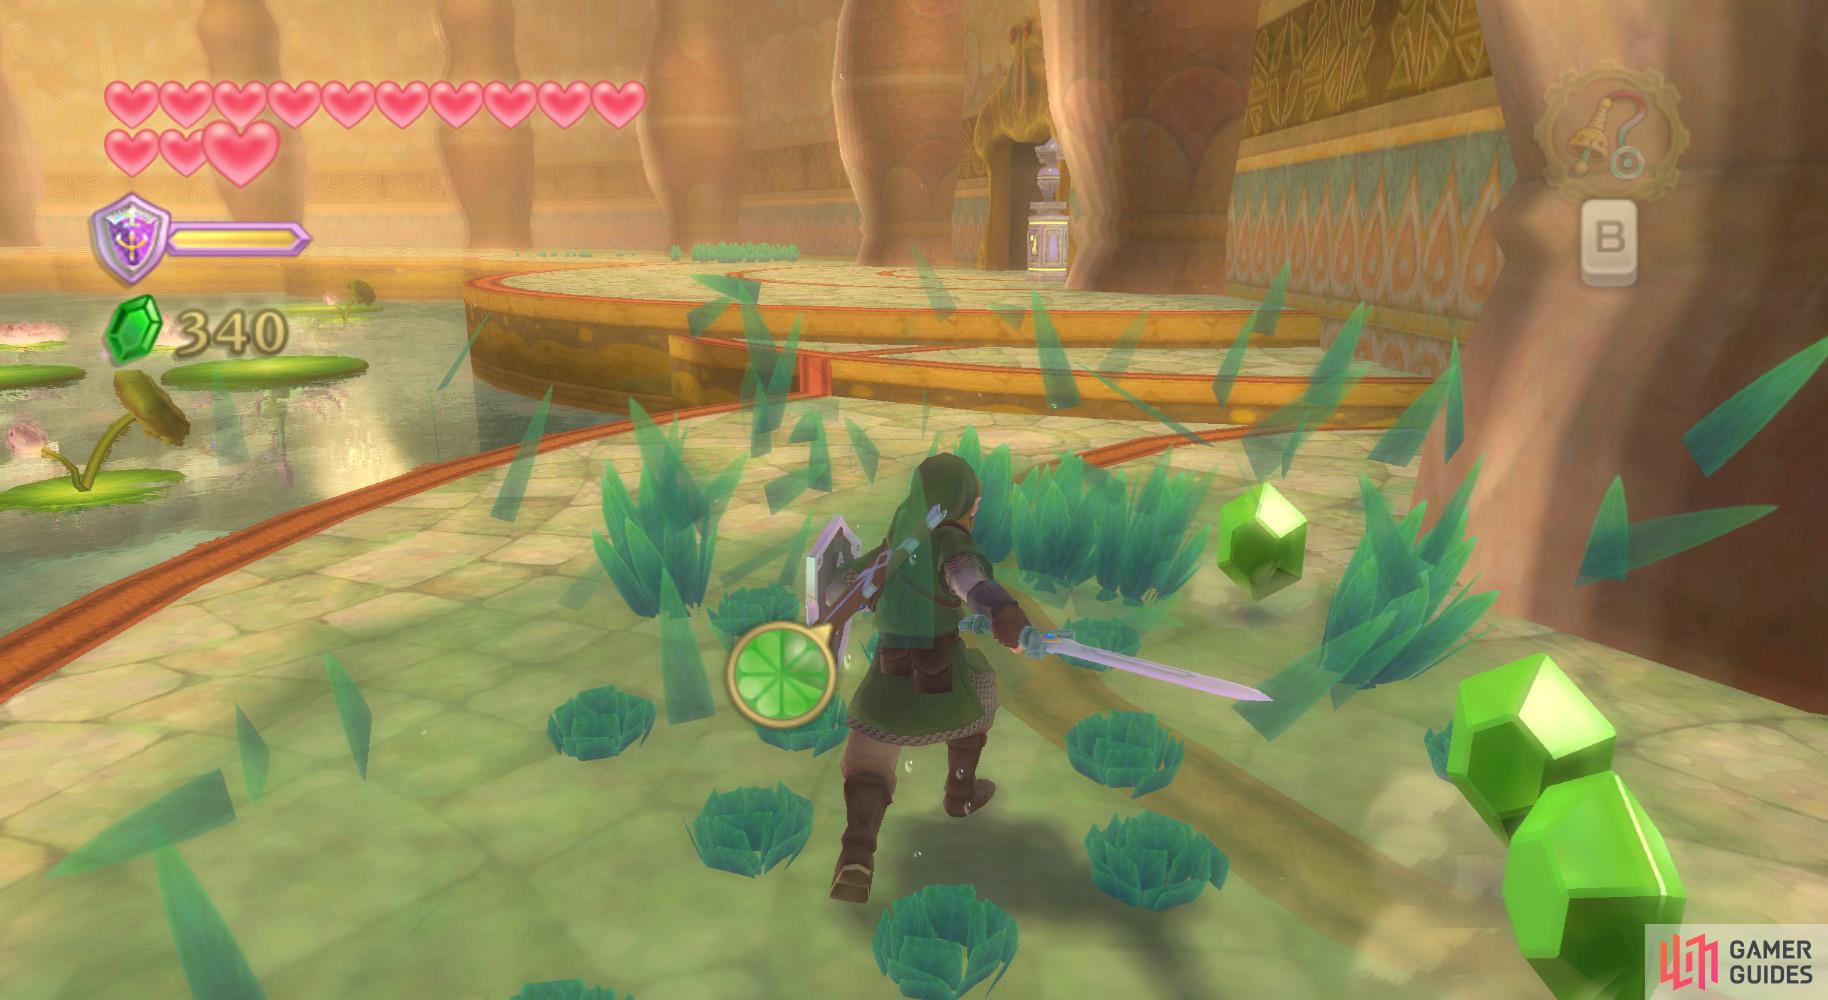 Carrying one of these medals makes rupees more likely to drop.